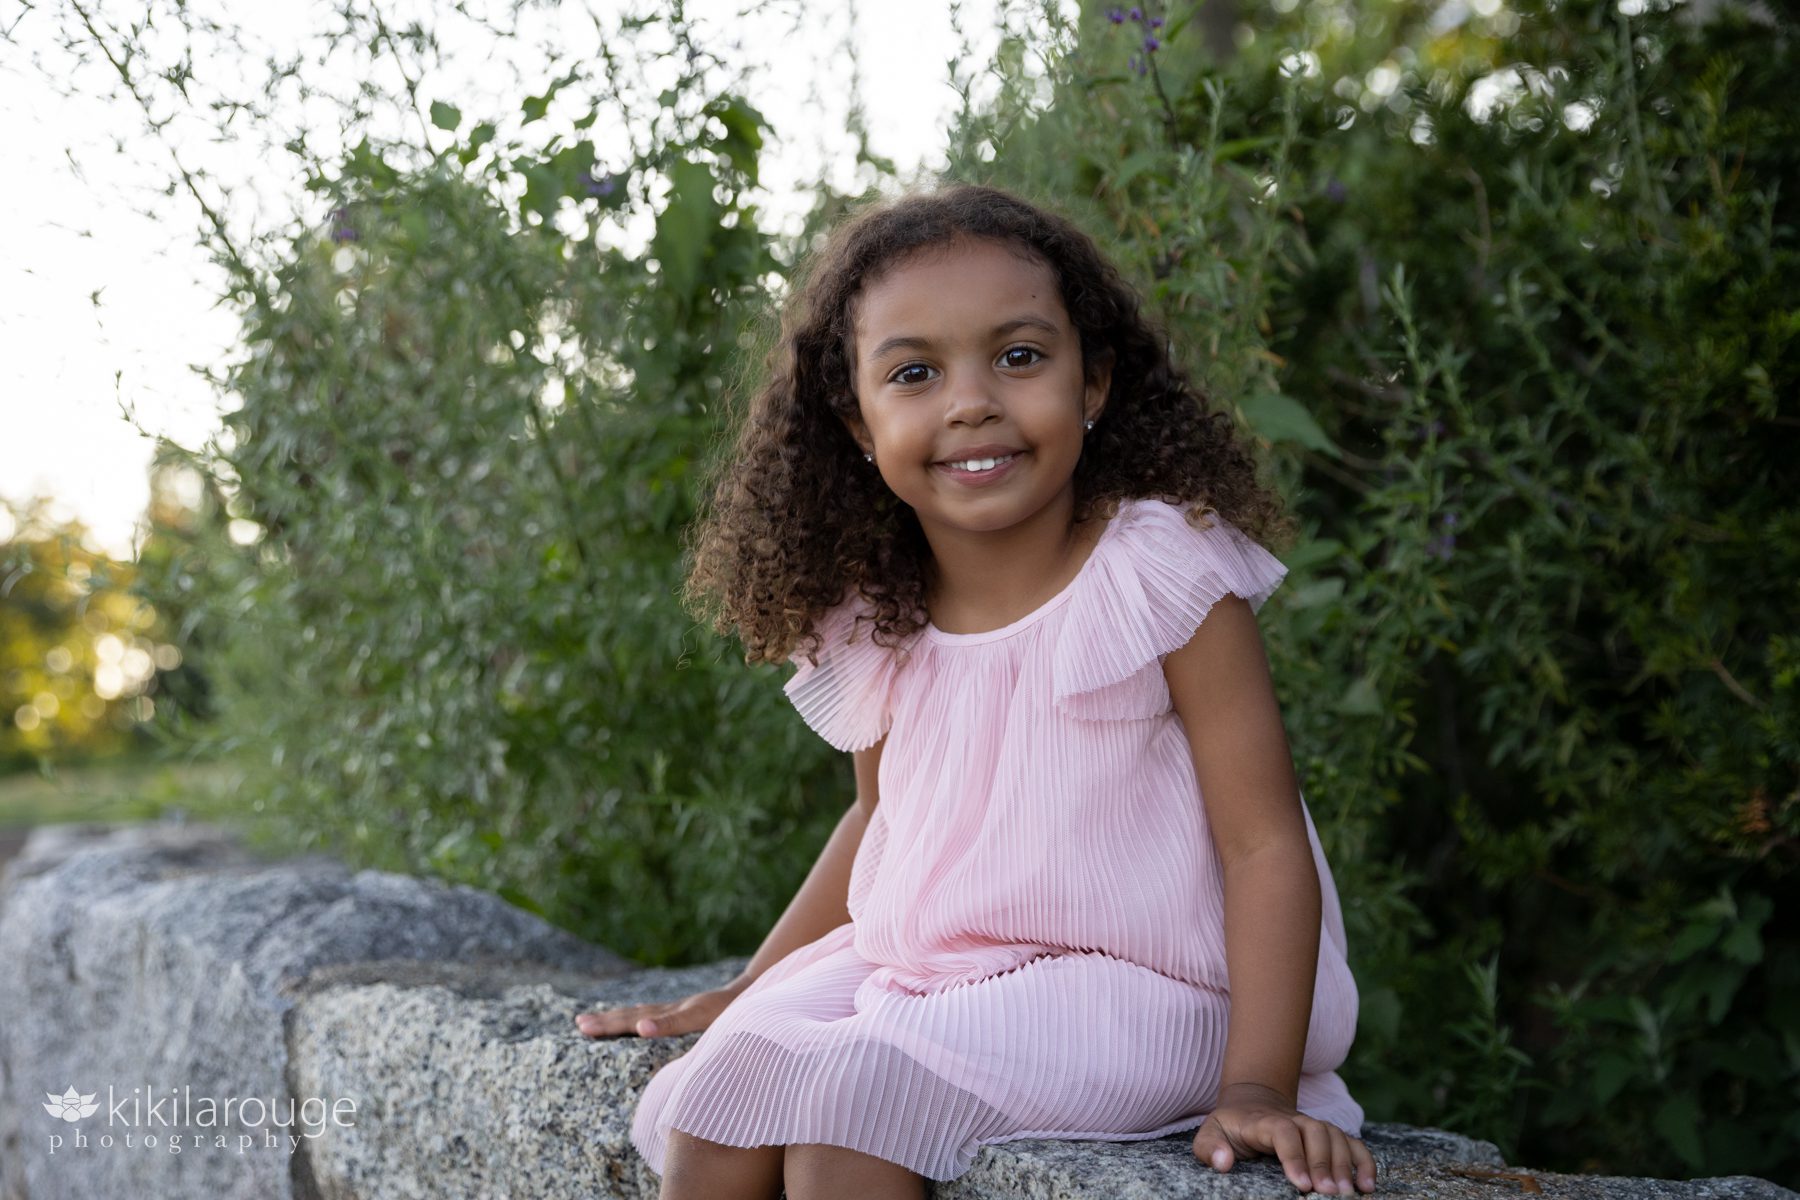 Adorable little girl with black curly hair sitting on rock wall in pink dress